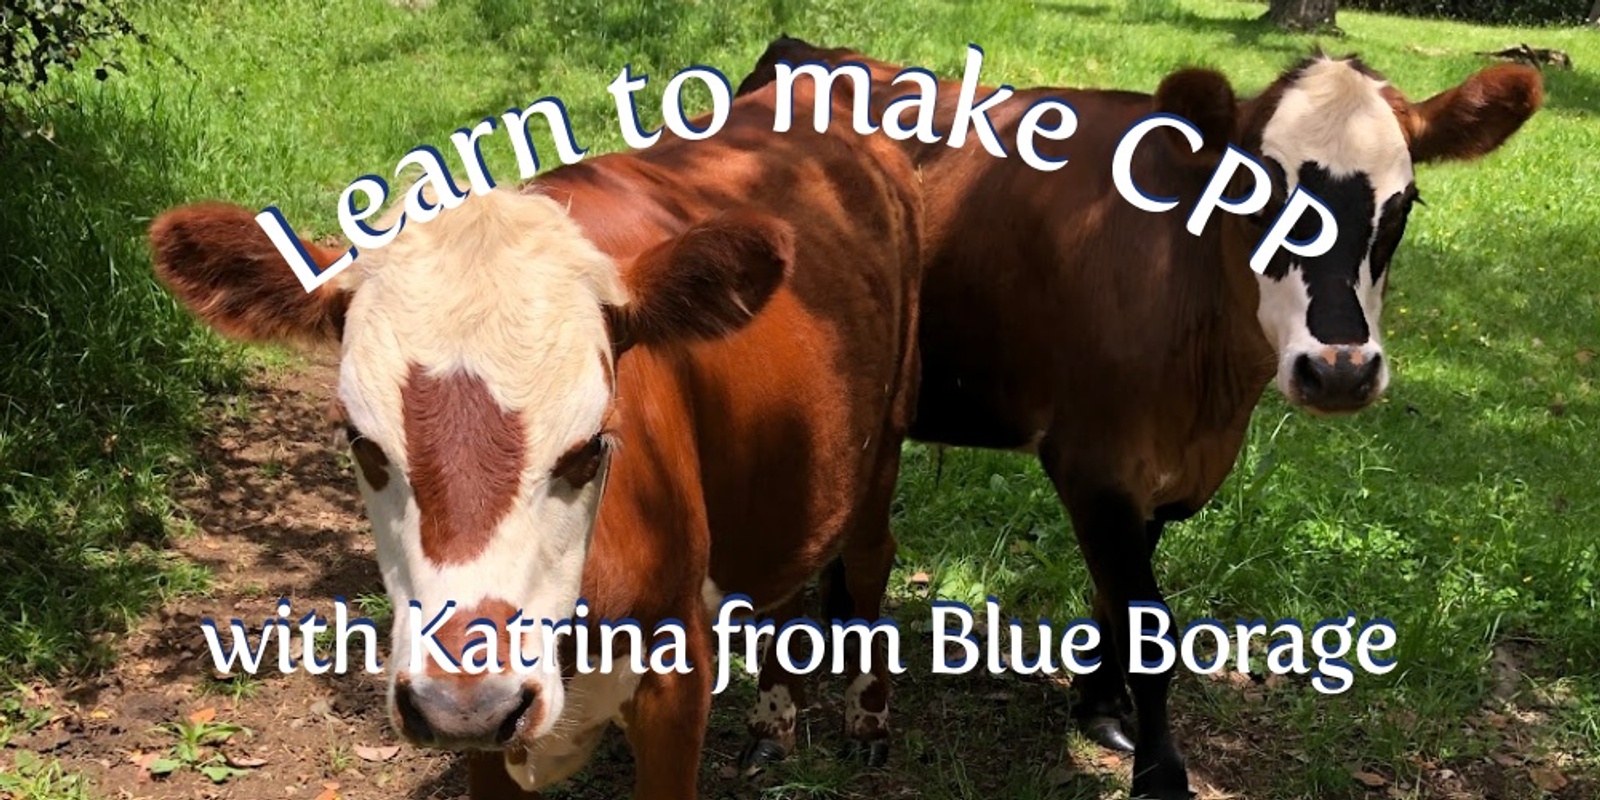 Learn how to make Biodynamic CPP (Cow Pat Pit preparation)